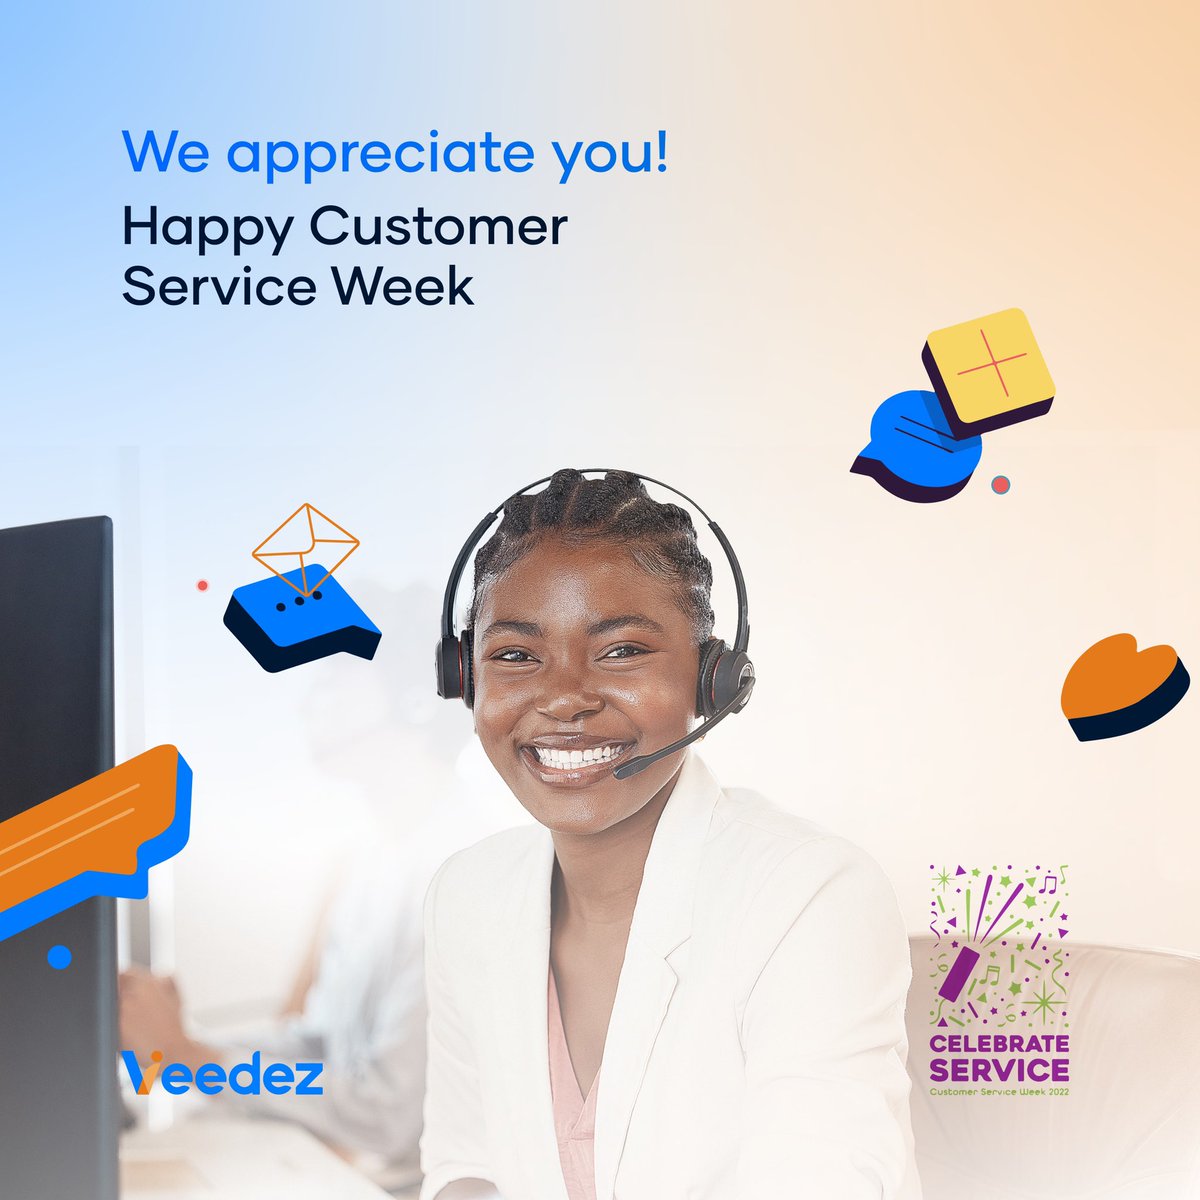 Happy Customer Service Week!

We celebrate the commitment and hardwork of our customer service team in placing the needs of our customers first 💙
 
#Useveedez #Customerservice